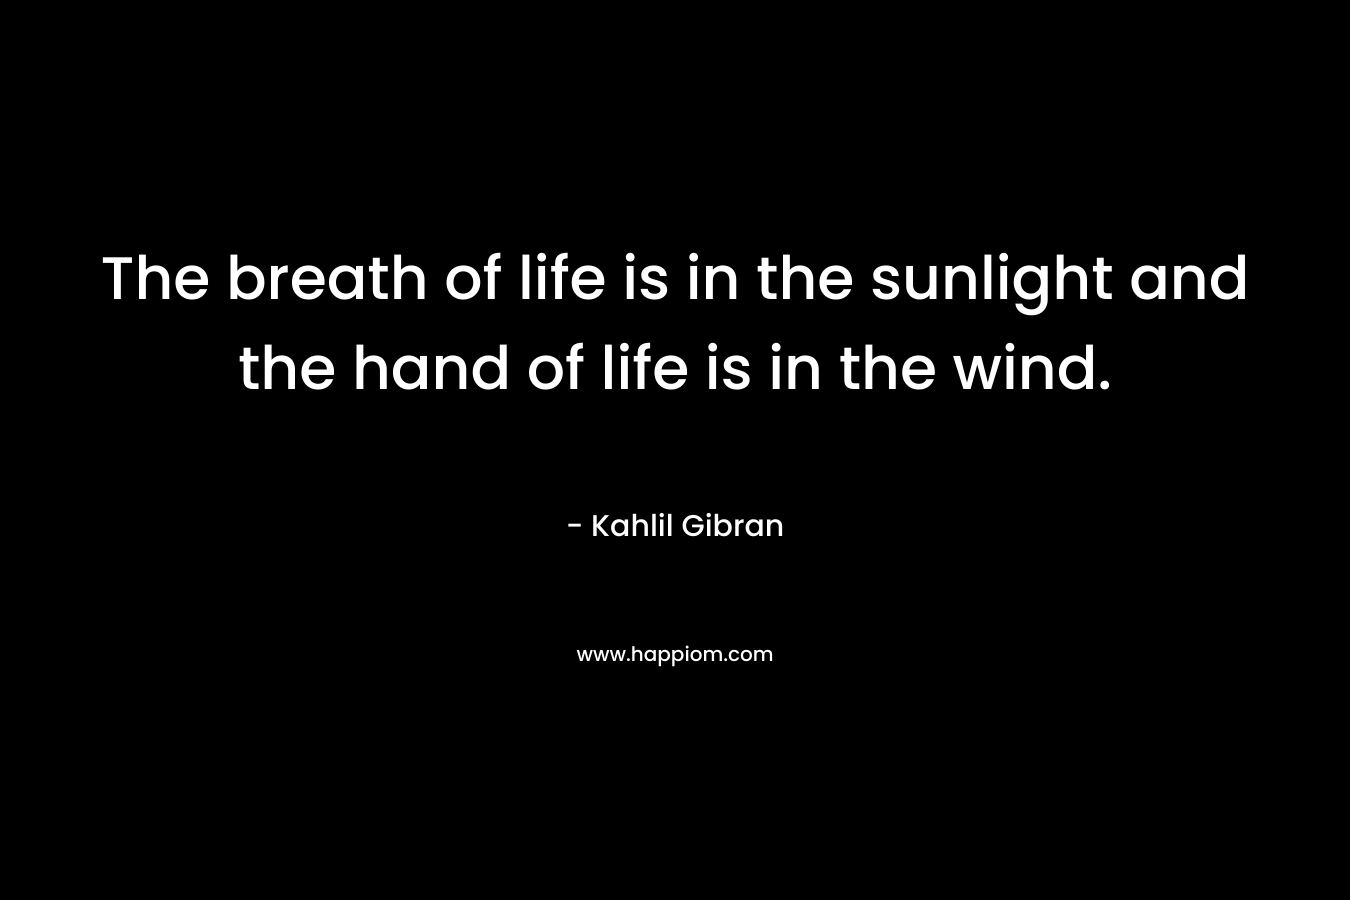 The breath of life is in the sunlight and the hand of life is in the wind.